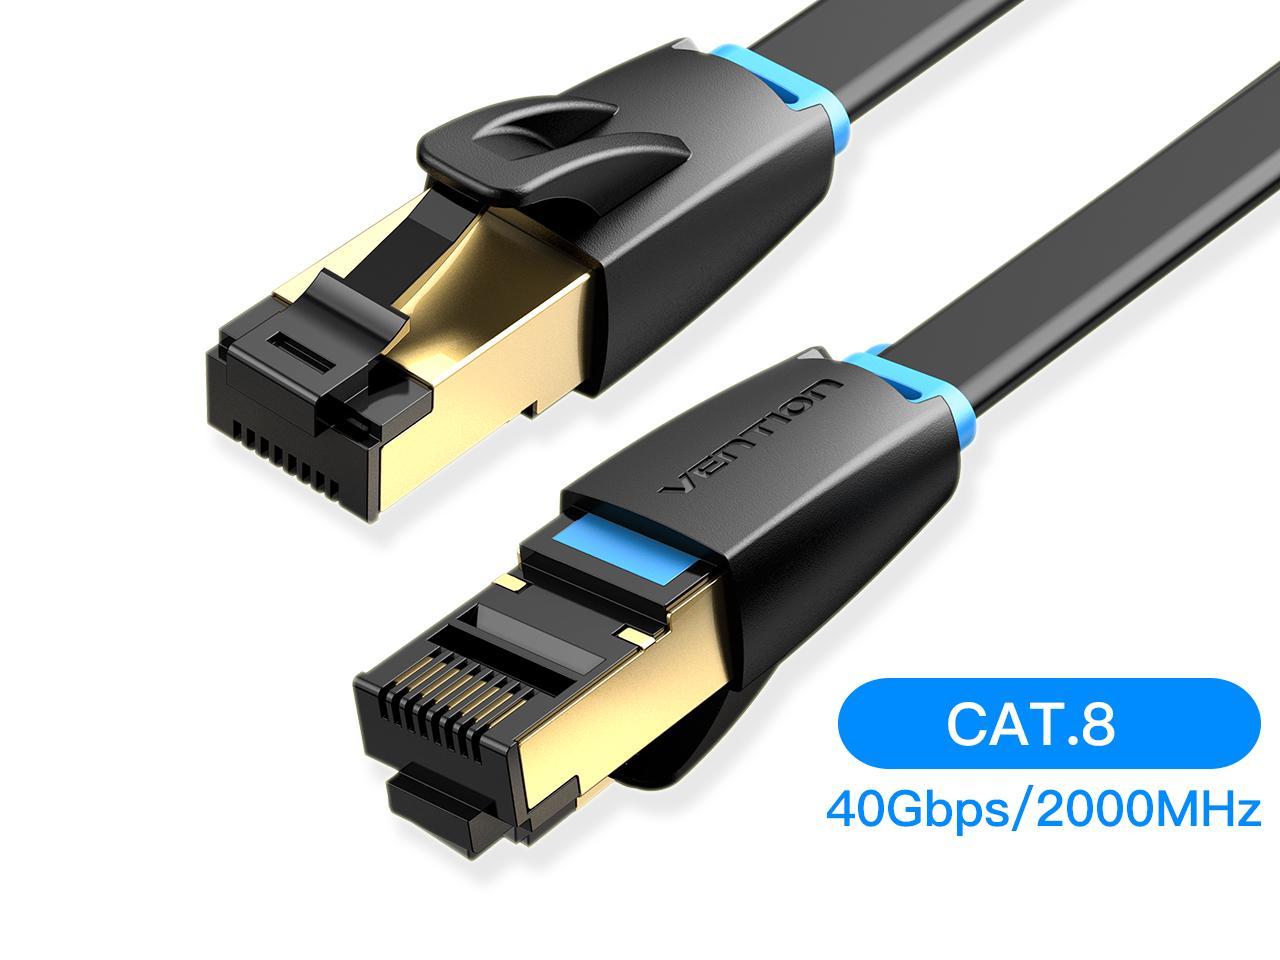 Smart TV Router 6 Feet High Speed CAT8 LAN Network Cable for Game Consoles BlueRigger RJ45 CAT 8 Ethernet Cable 40Gbps, 2000MHz, CAT8 Ethernet Cable